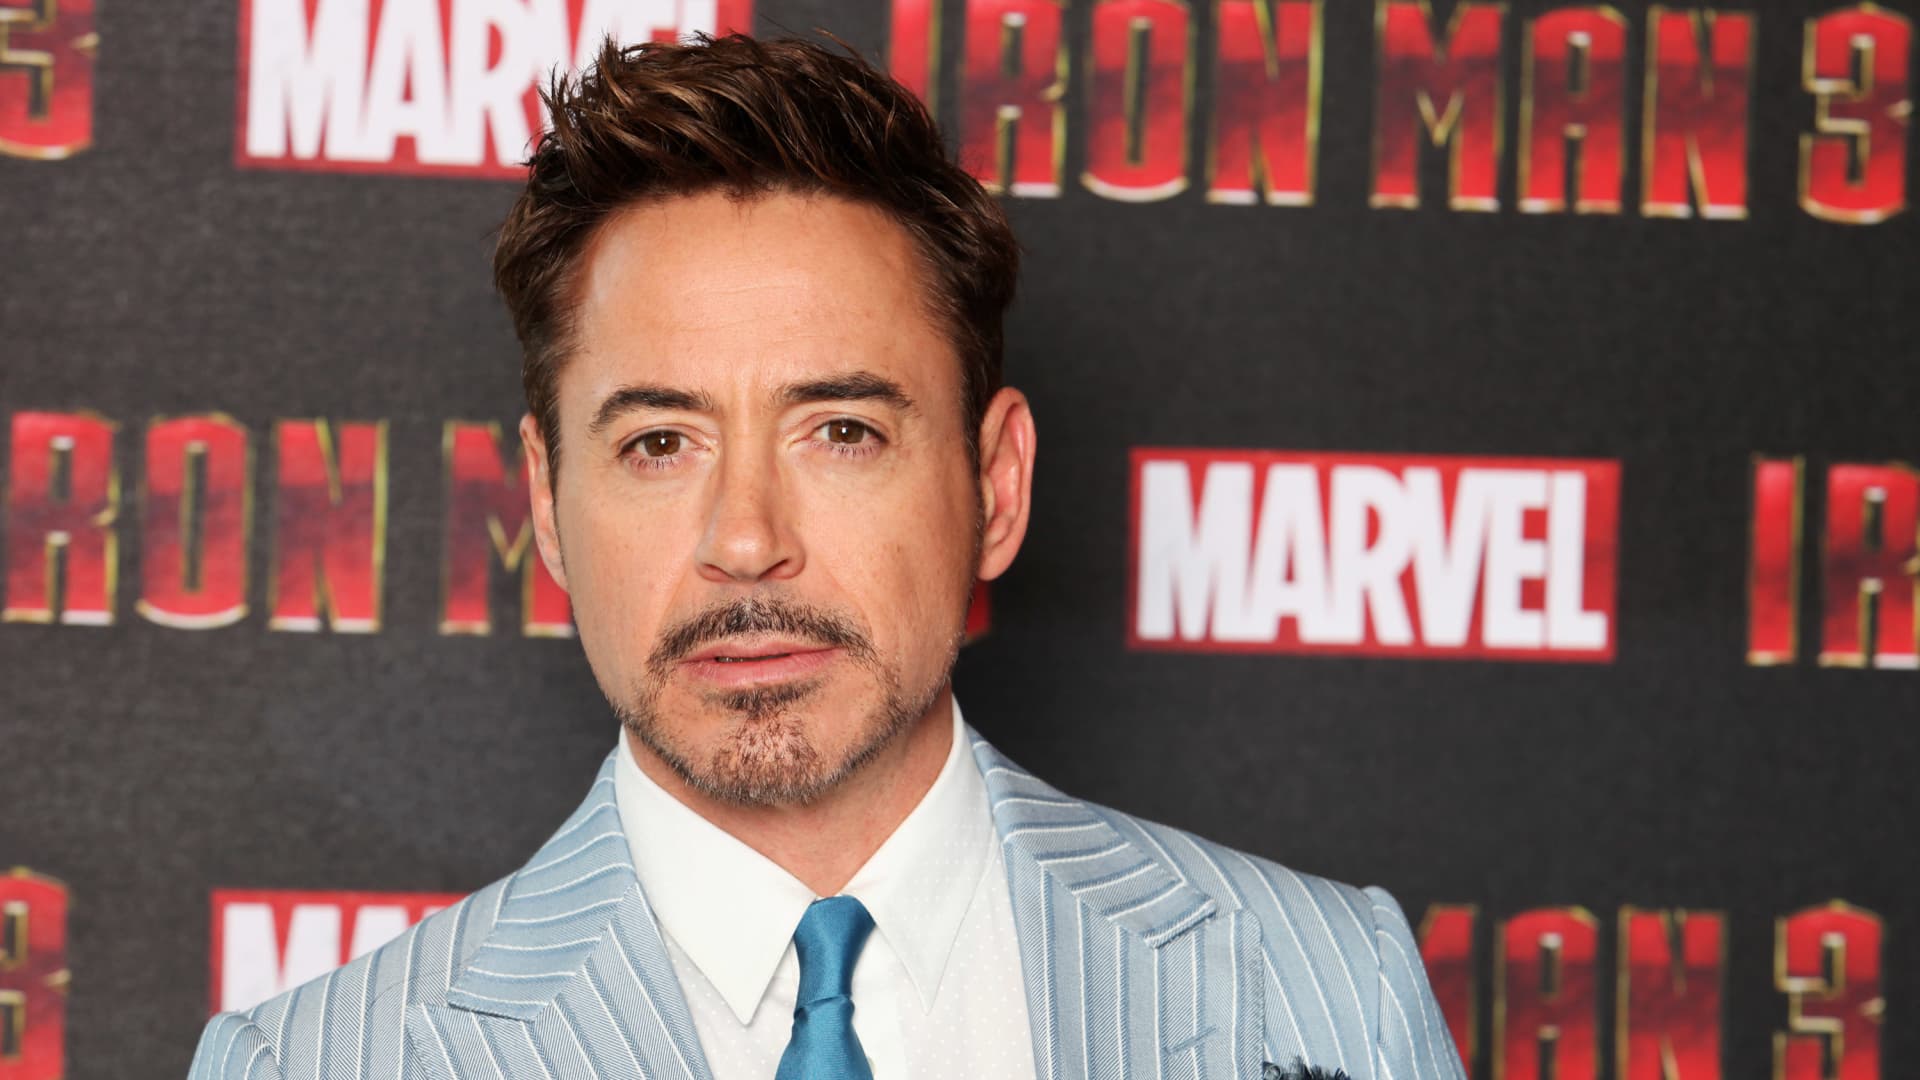 Davos: Actor and investor Robert Downey Jr. says why he likes Biden